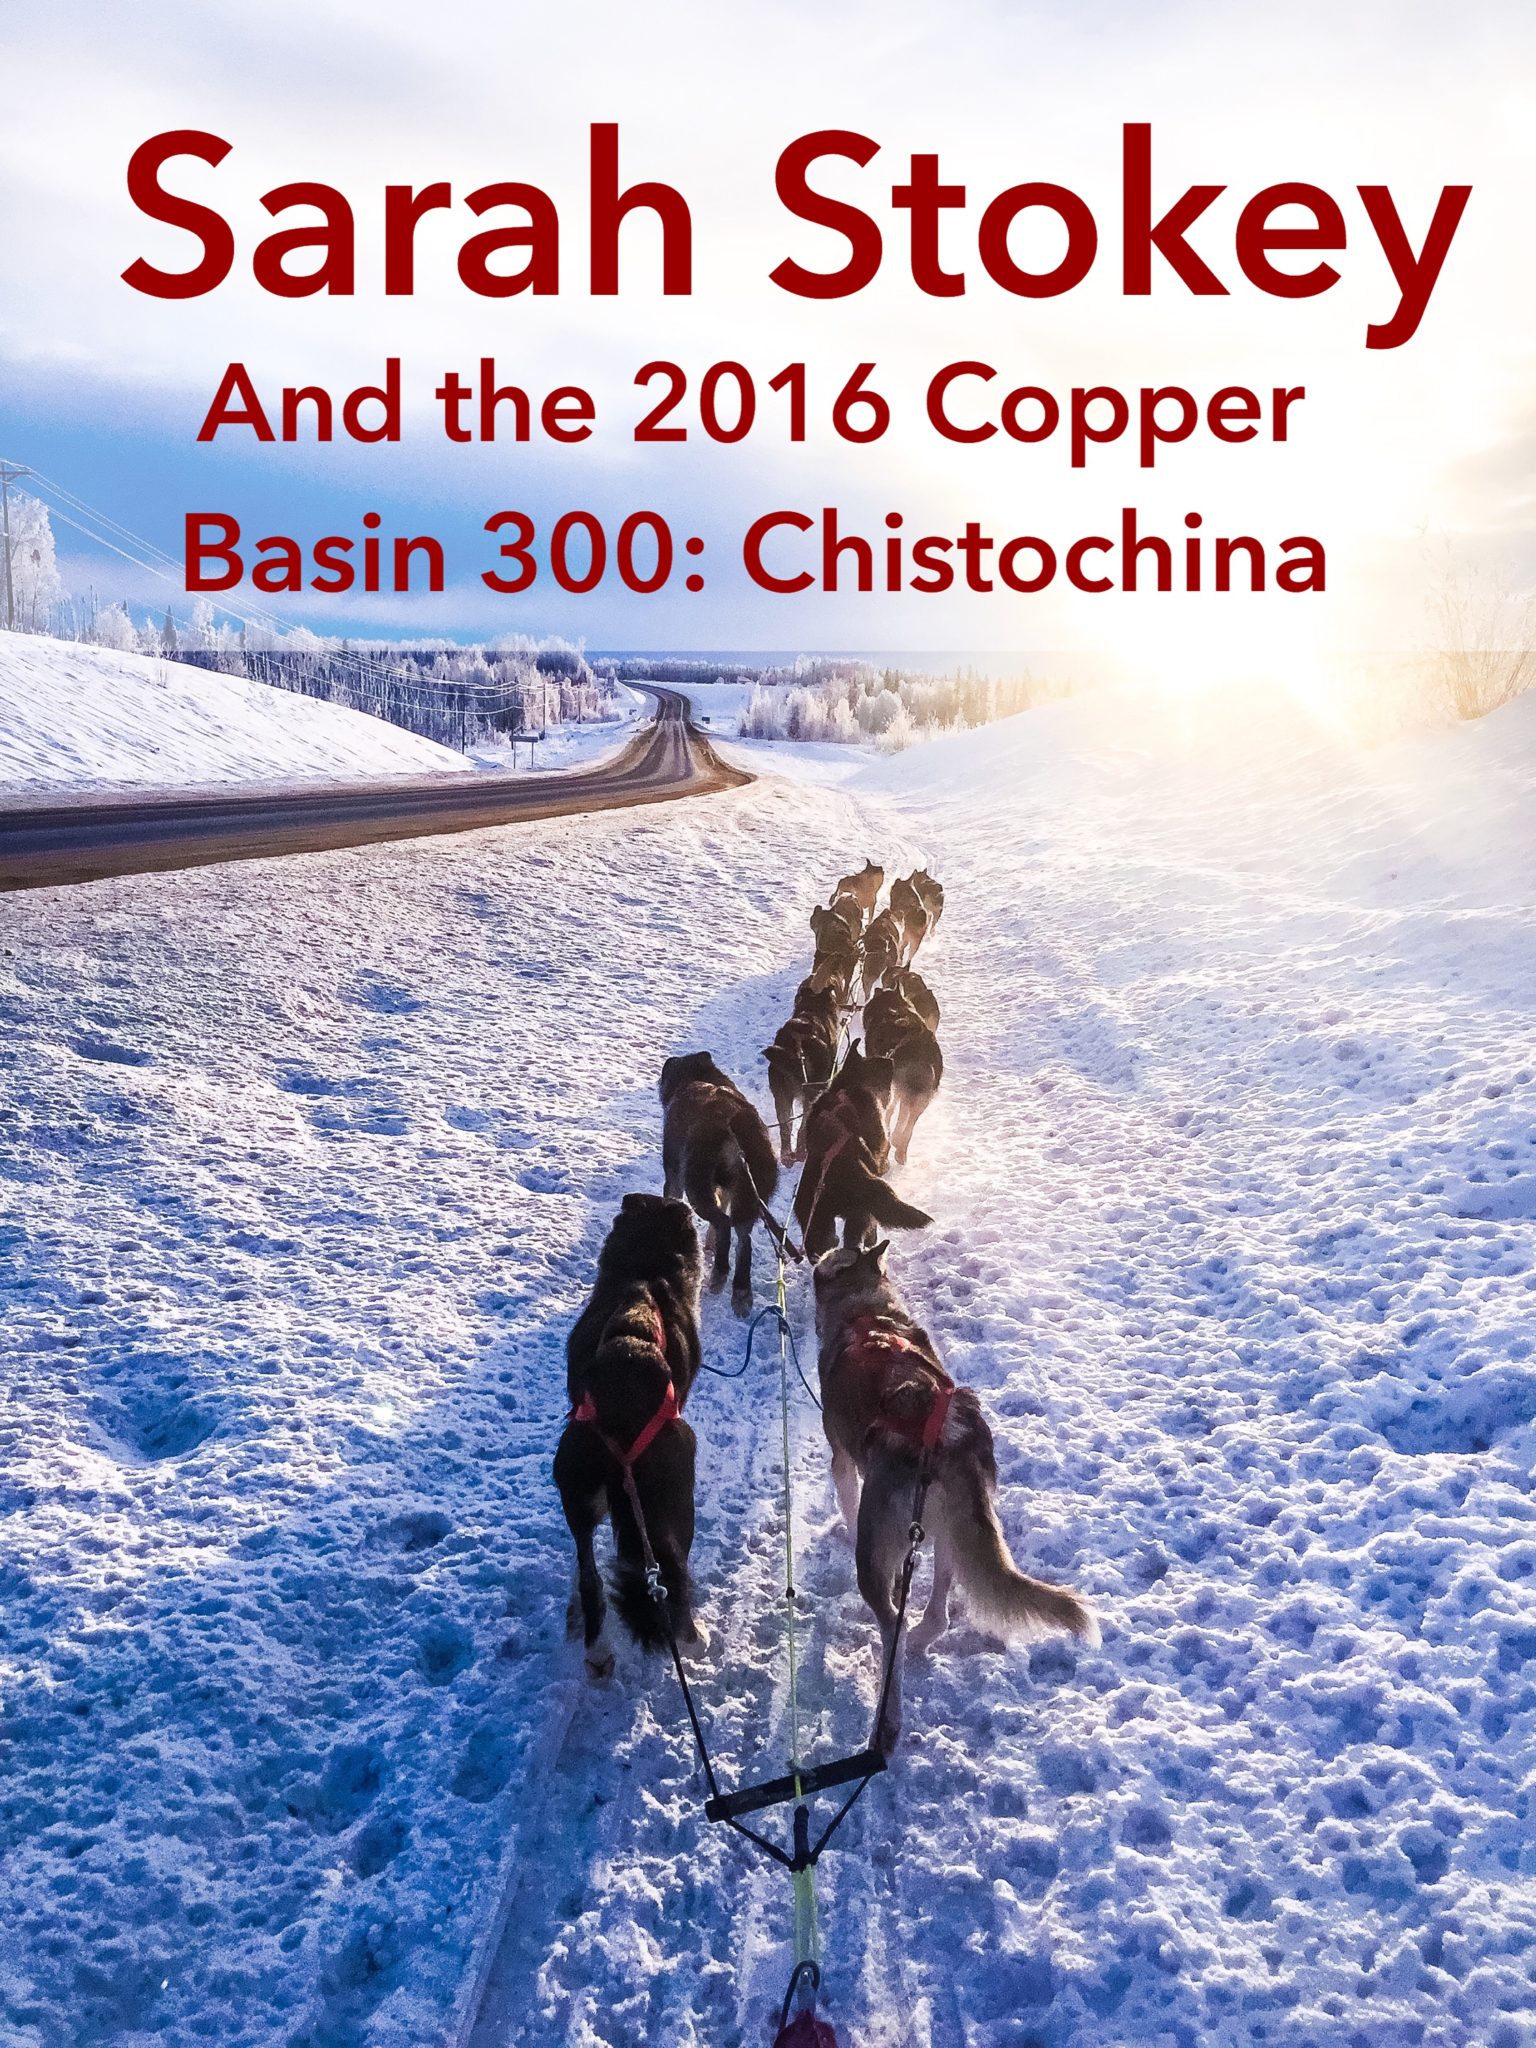 Sarah Stokey and the 2016 Copper Basin: Chistochina | Turning Heads Kennel